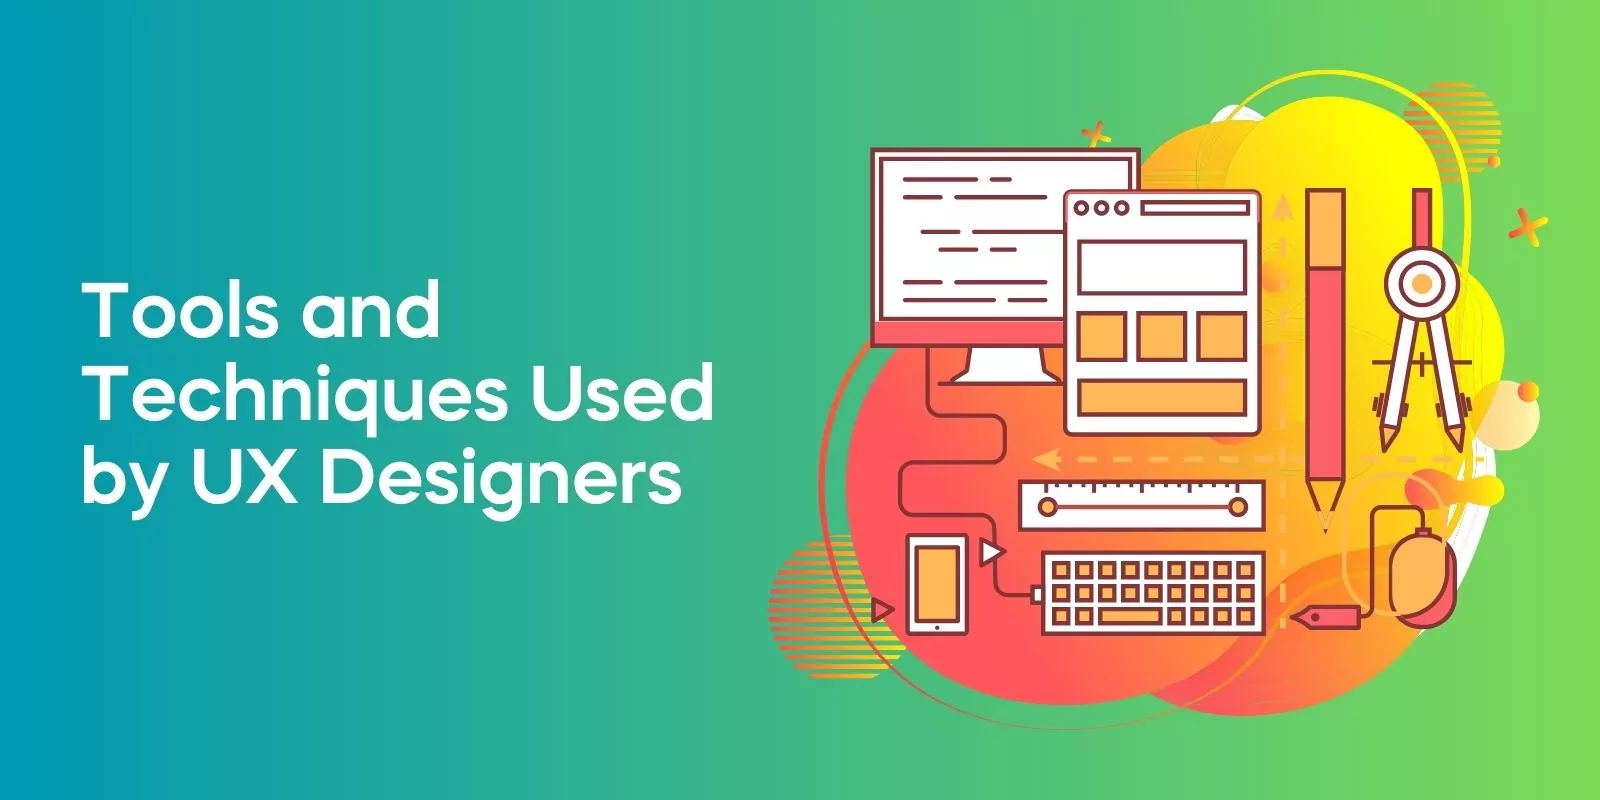 Tools and Techniques Used by UX Designers